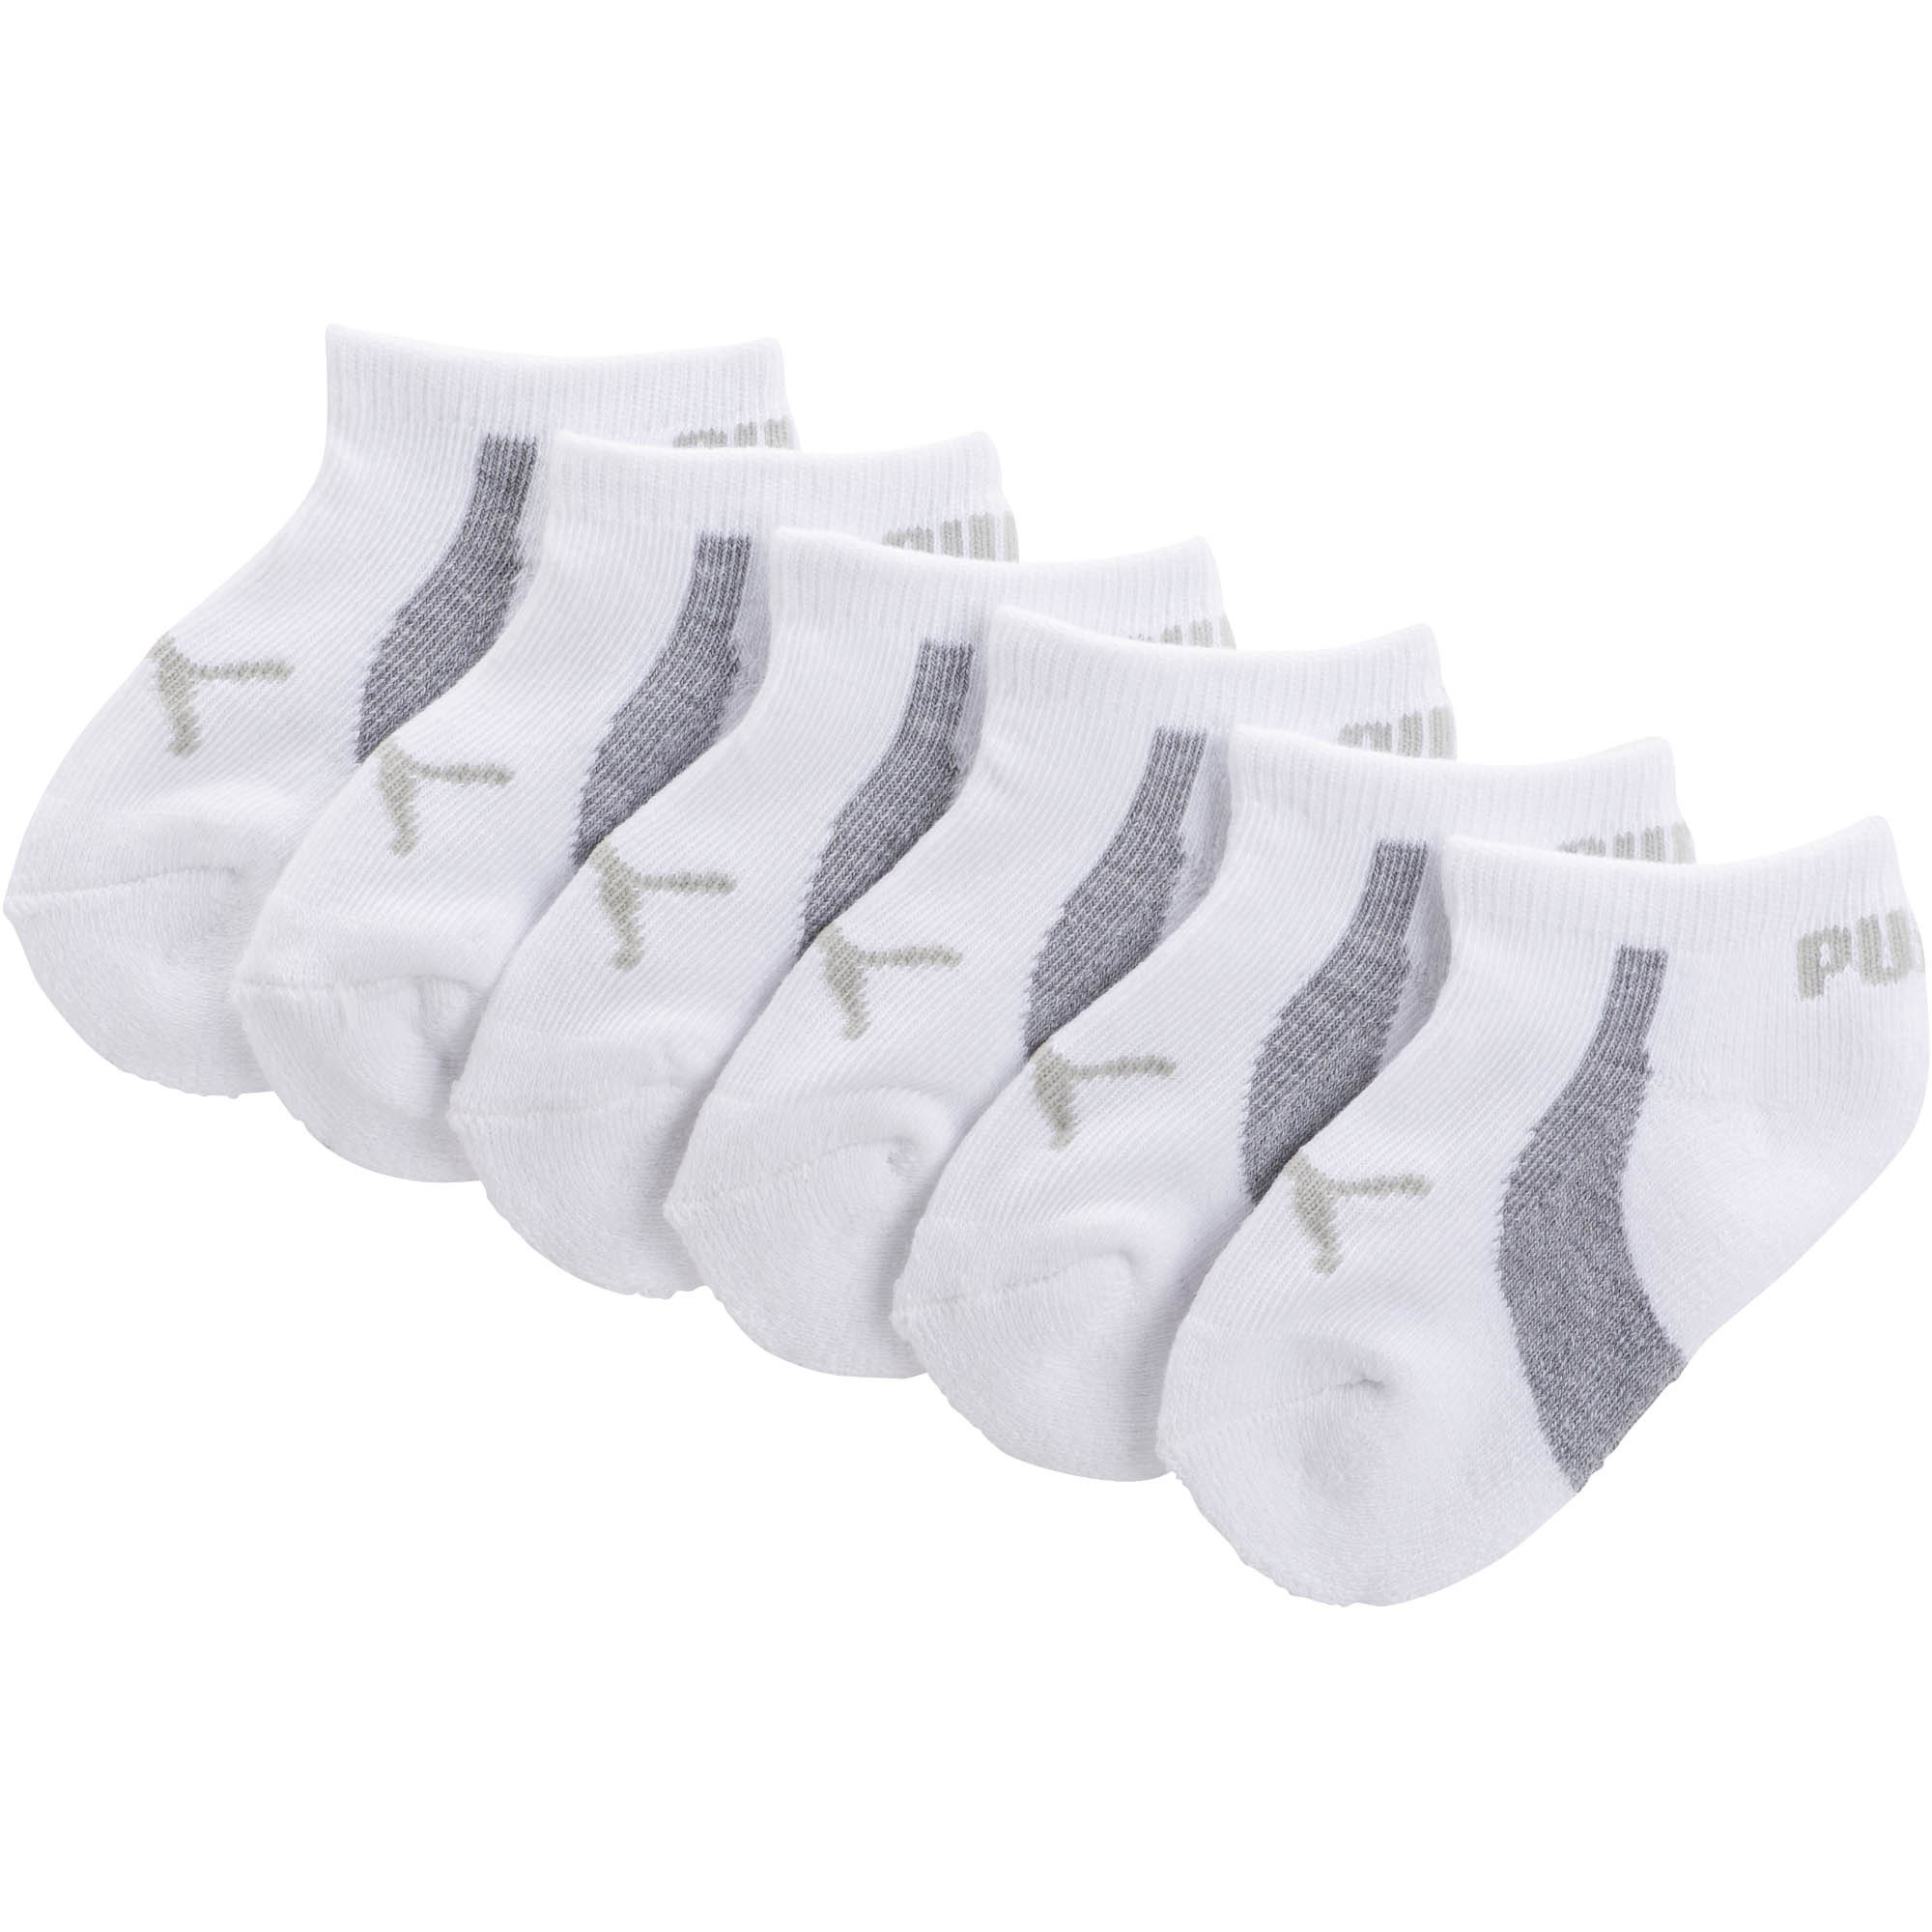 PUMA Toddler Terry No Show Socks (6 Pack) White Size 2-4T